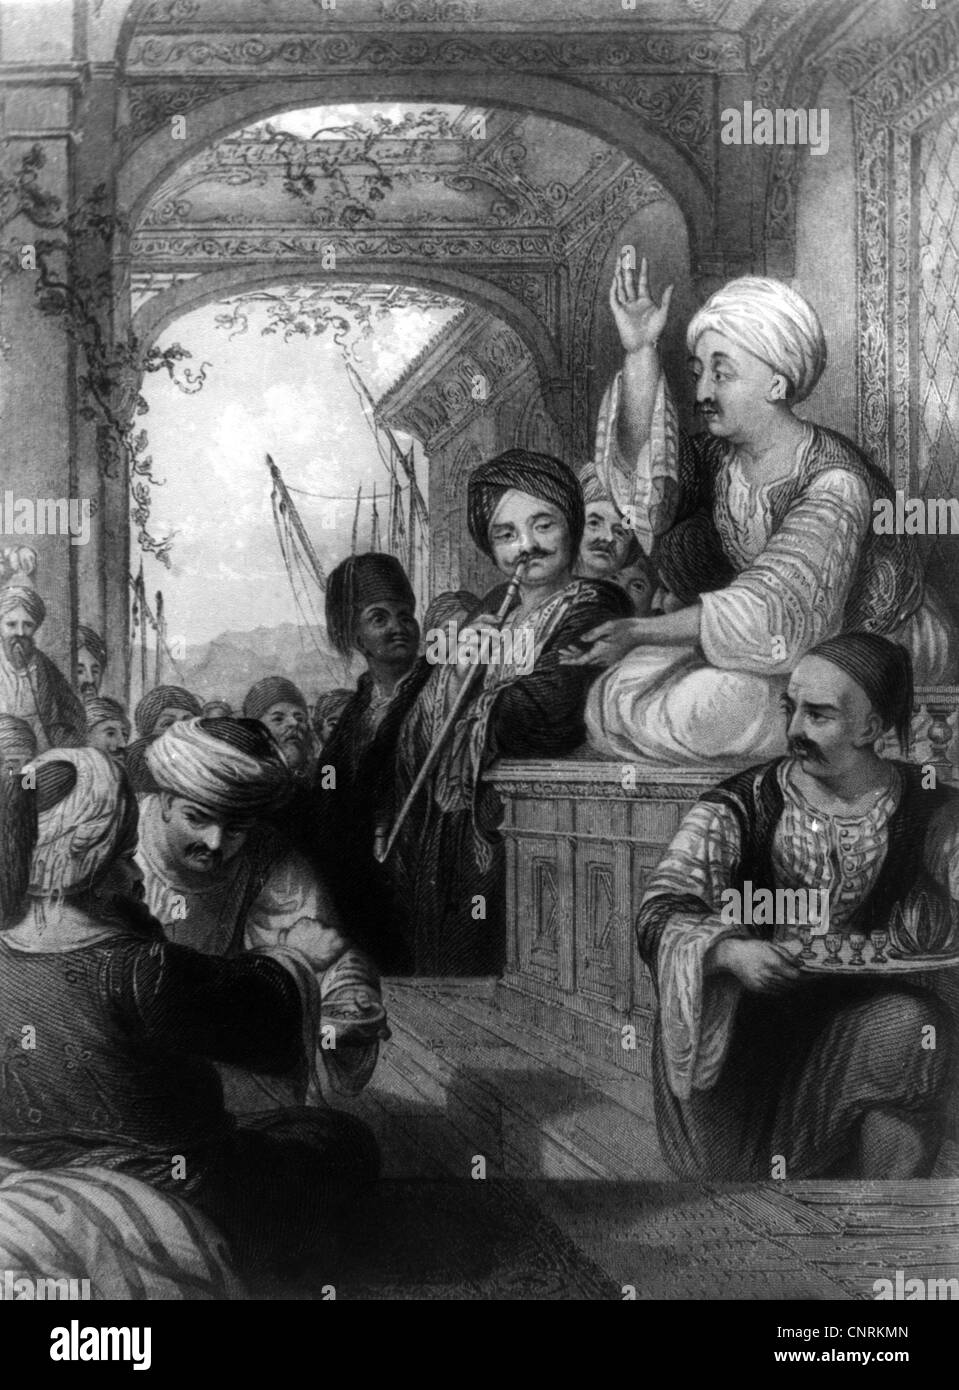 theatre, audience, Turkish men listen to a meddah (story teller), engraving, 19th century, theater, mime, turban, turbans, narrator, teller, narrators, tellers, telling, tell, tells, narrate, narrating, stage, stages, Indian style sitting, sit cross-legged, sitting, sit, artist, artists, Turkey, Orient, the Middle East, oriental, 18th century, smoking pipe, pipes, smoking, smoke, tobacco, Fez, gesture, gestures, gesticulation, body language, mimic, mimic art, historic, historical, people, Additional-Rights-Clearences-Not Available Stock Photo